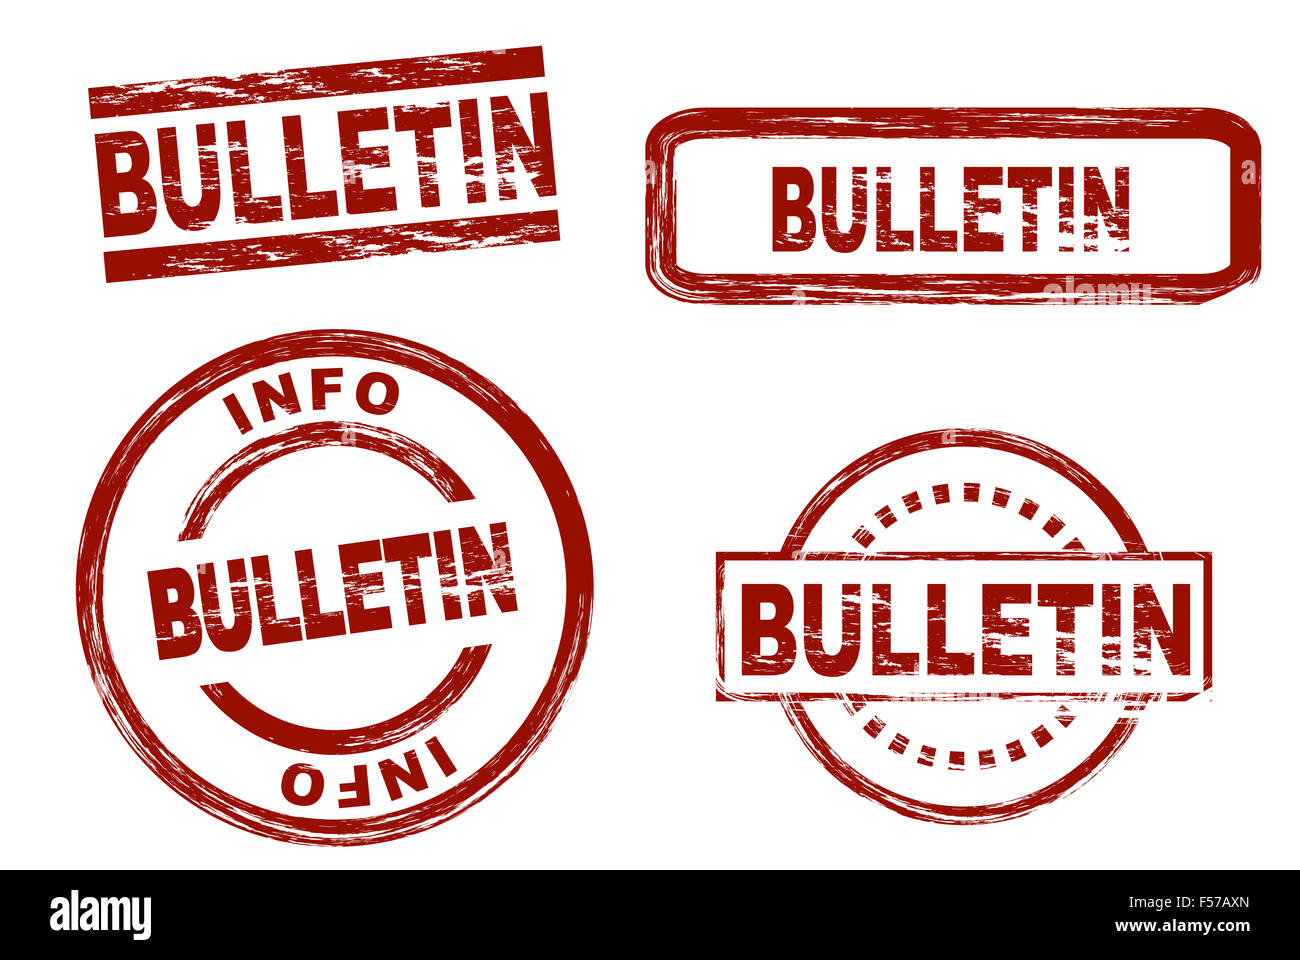 Set of stylized stamps showing the term bulletin. All on white background. Stock Photo